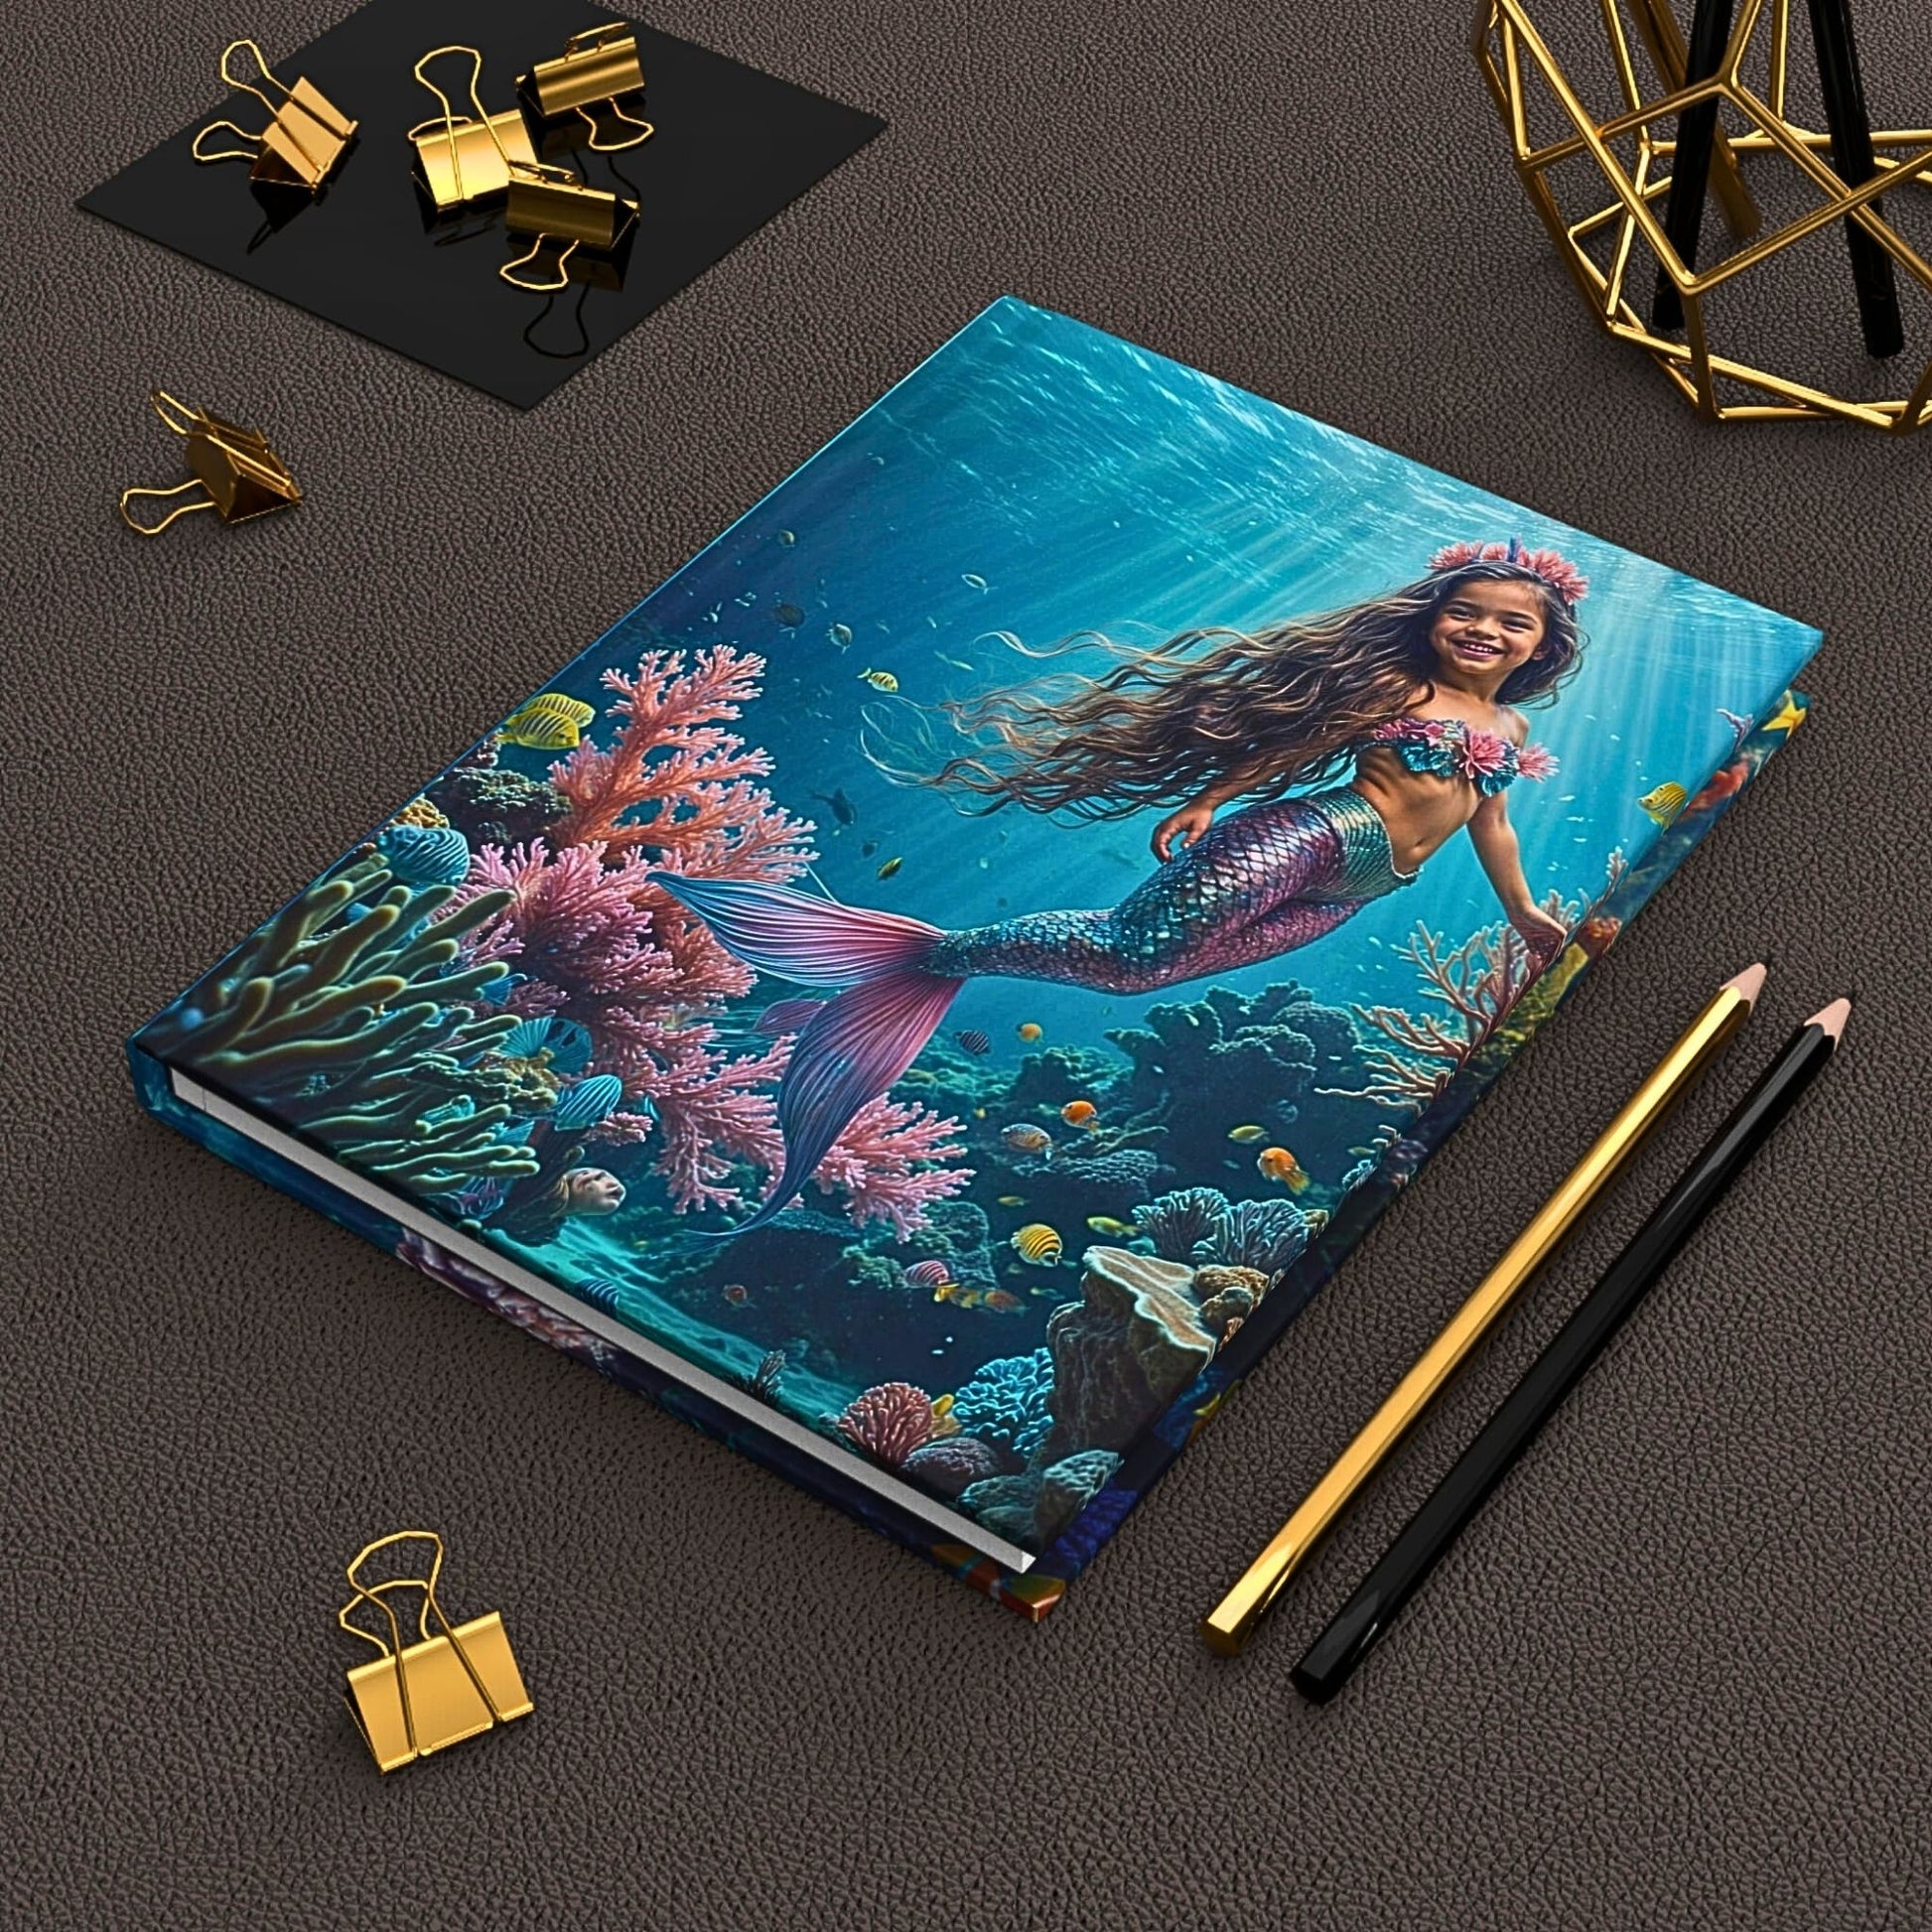 Embark on an enchanting journey with our Custom Mermaid Journal, designed from your treasured photo. Tailor-made for birthdays, this personalized gift inspires girls to capture their dreams and adventures in style.